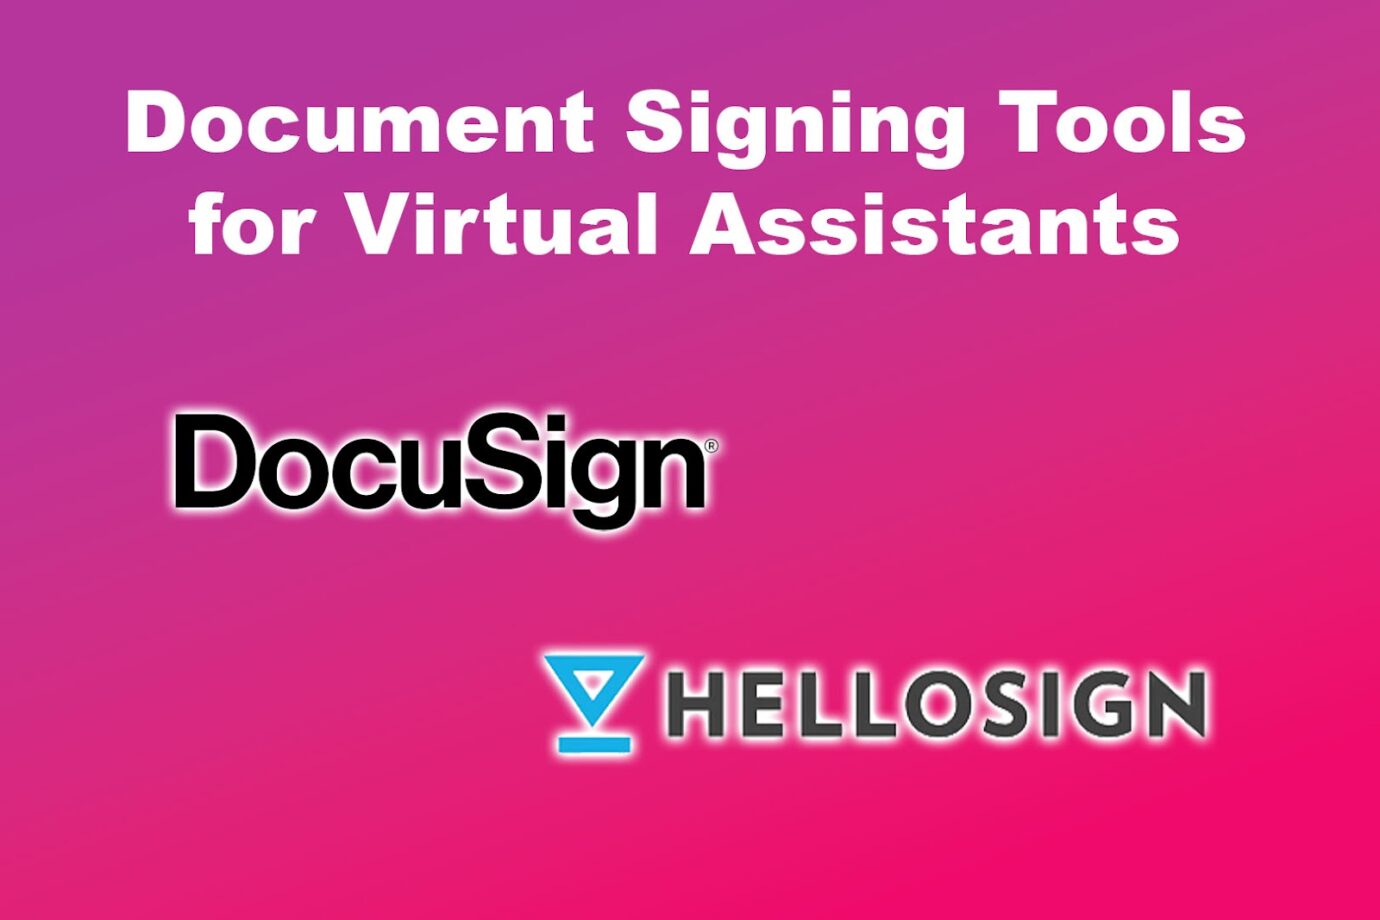 Document Signing Tools for Virtual Assistants